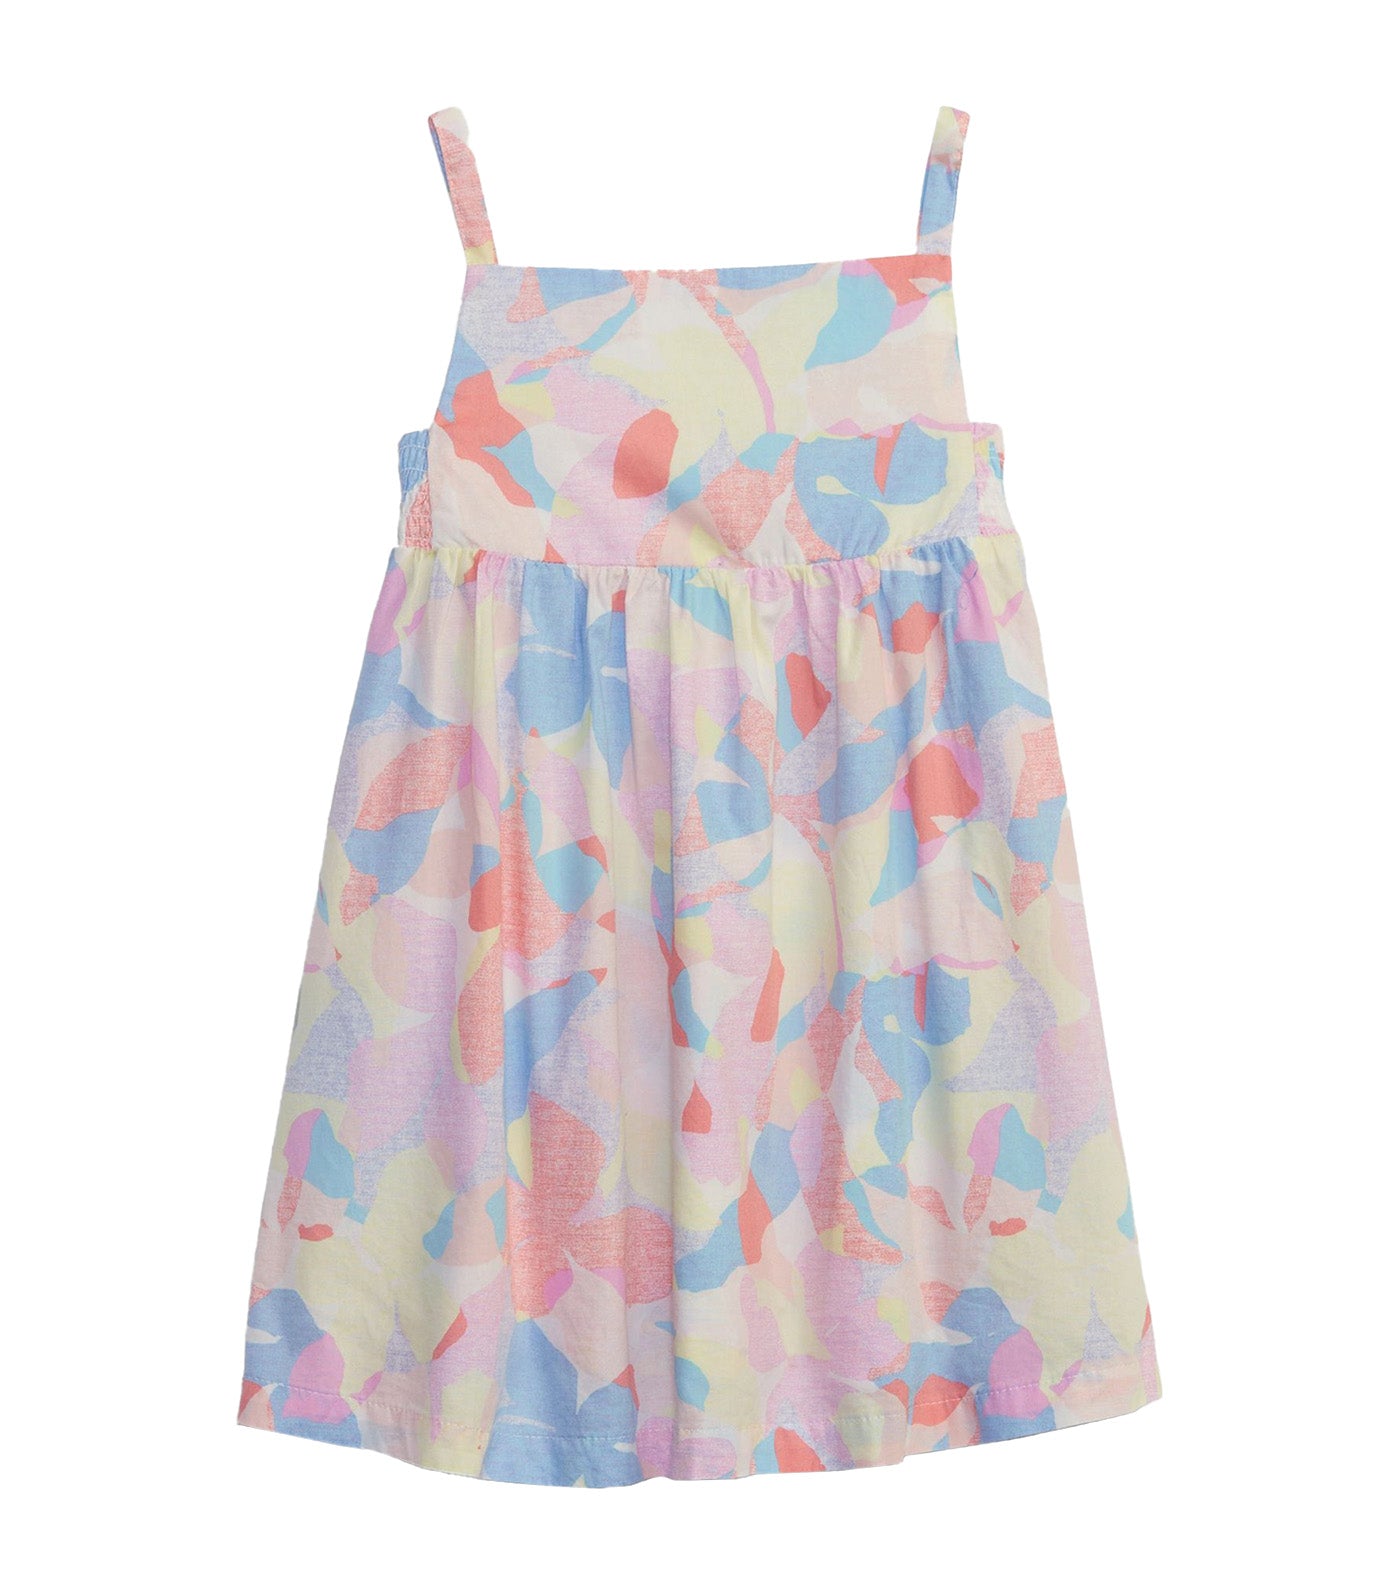 Toddler Print Popplin Dress - Abstract Floral